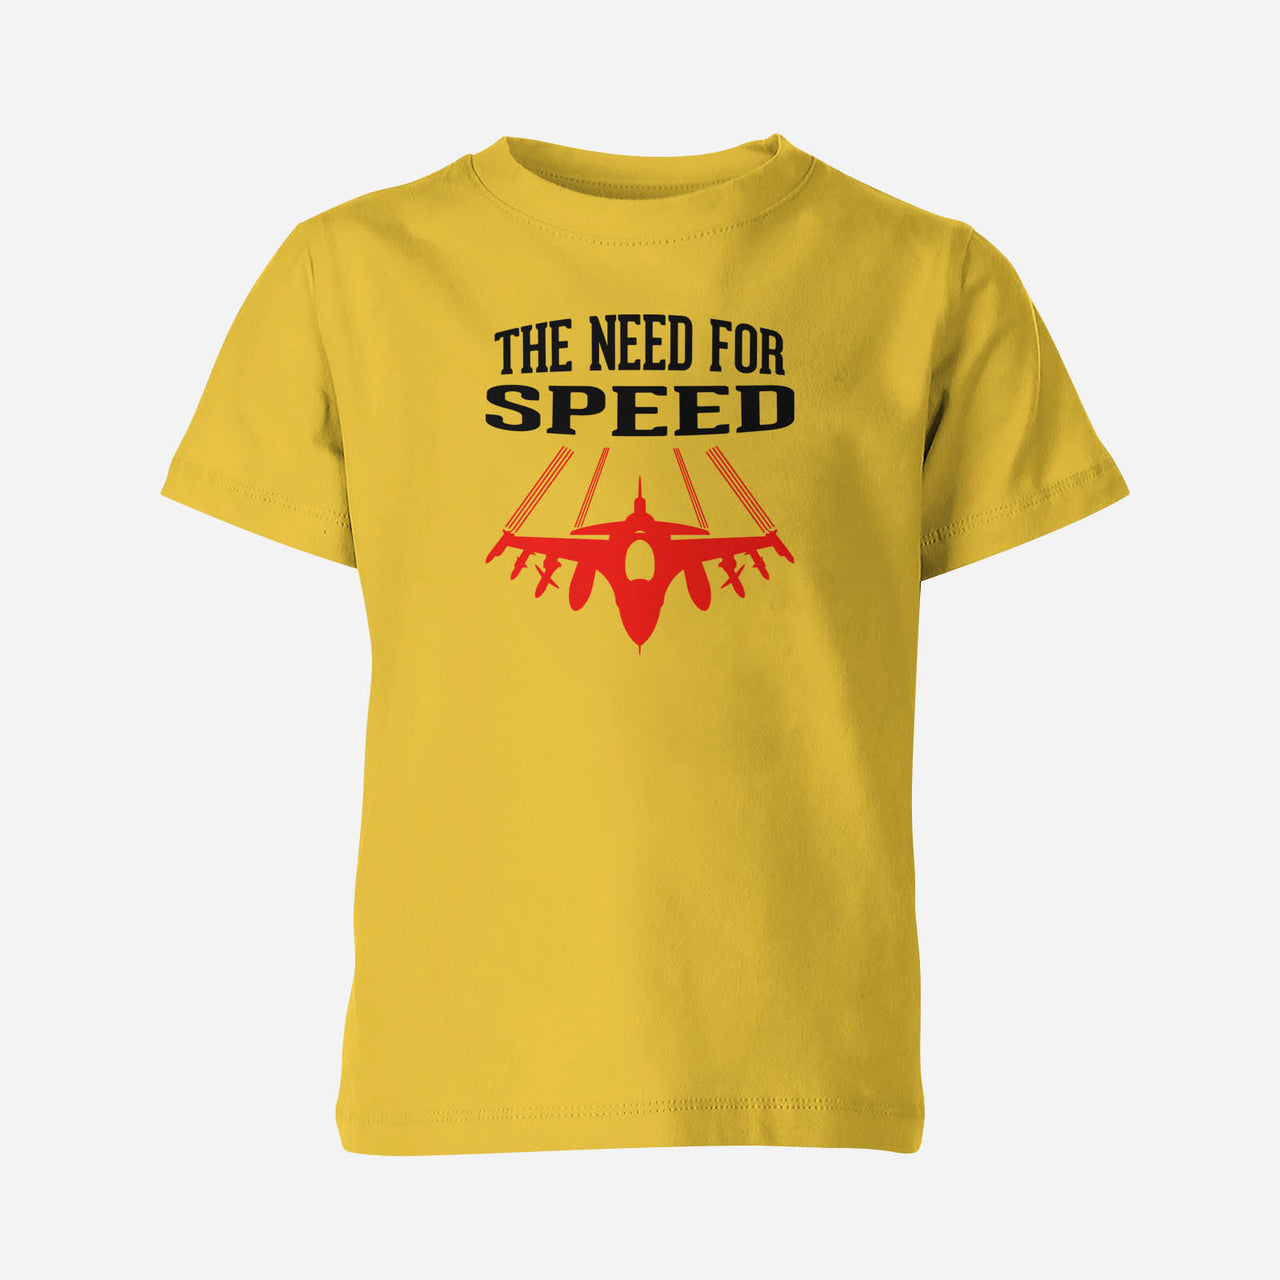 The Need For Speed Designed Children T-Shirts